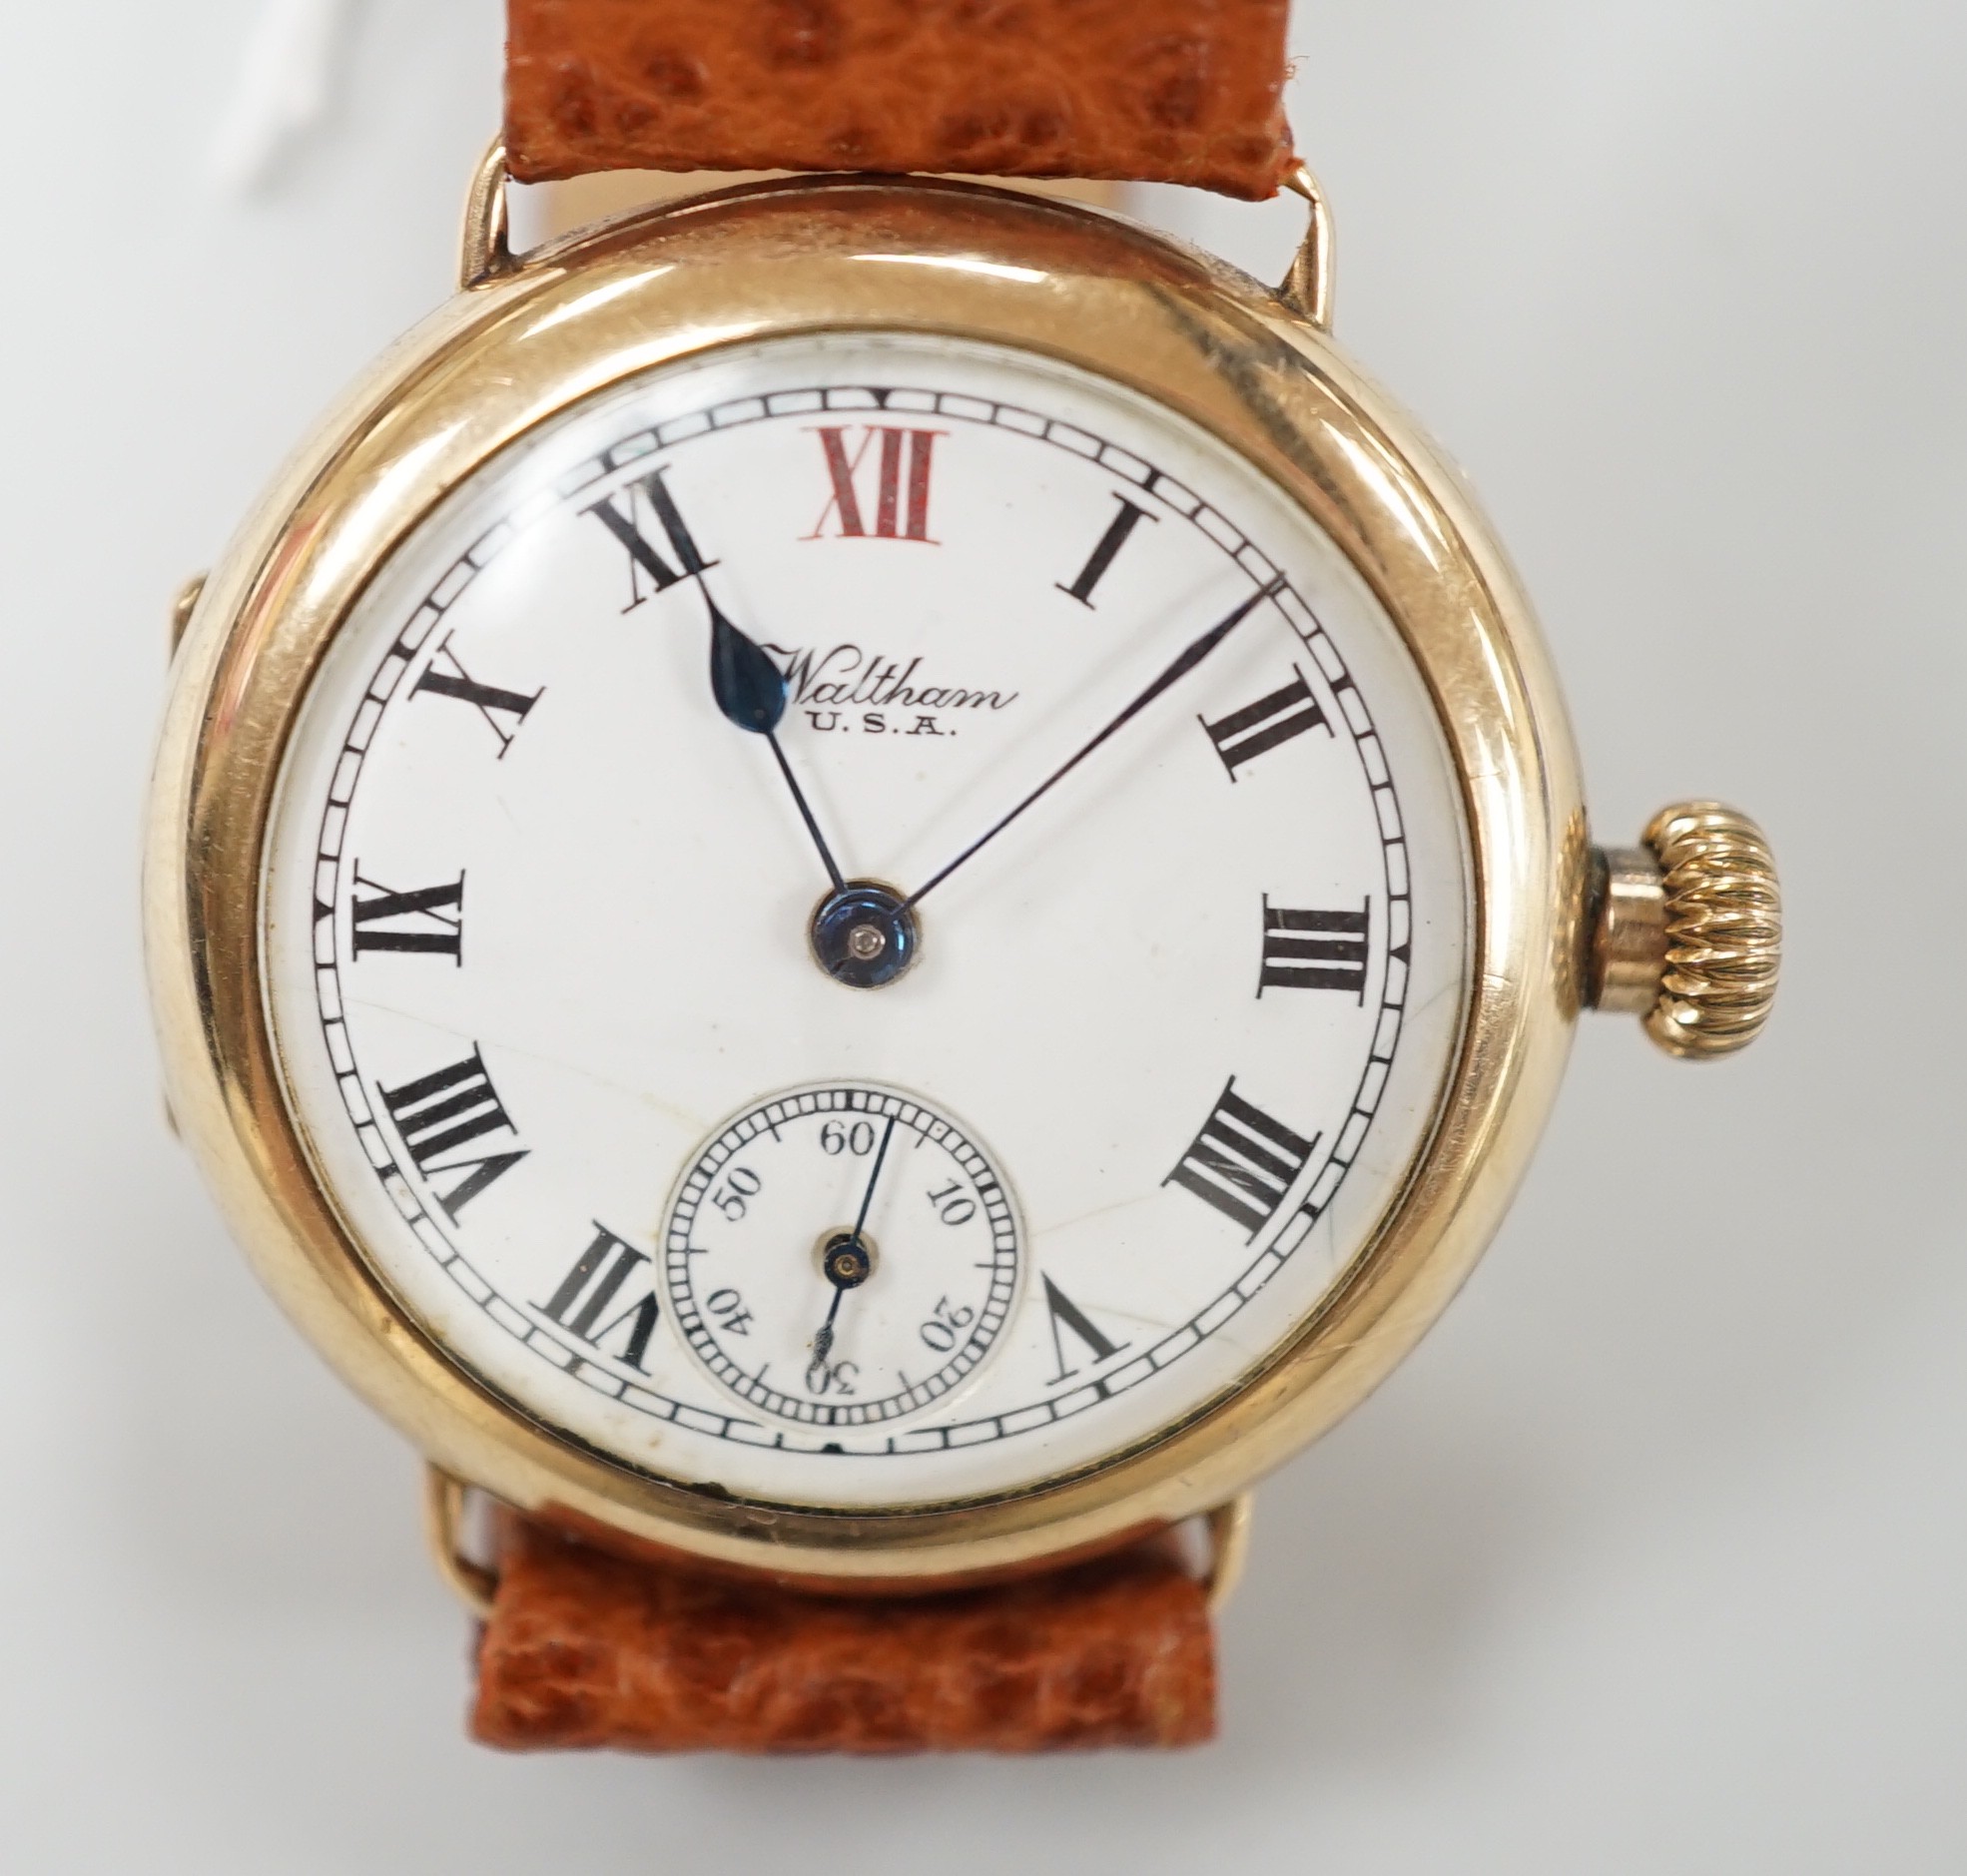 A gentleman's early 20th century 9ct gold Waltham manual wind wrist watch, with Roman dial and subsidiary seconds, on later associated leather strap, case diameter 32mm.